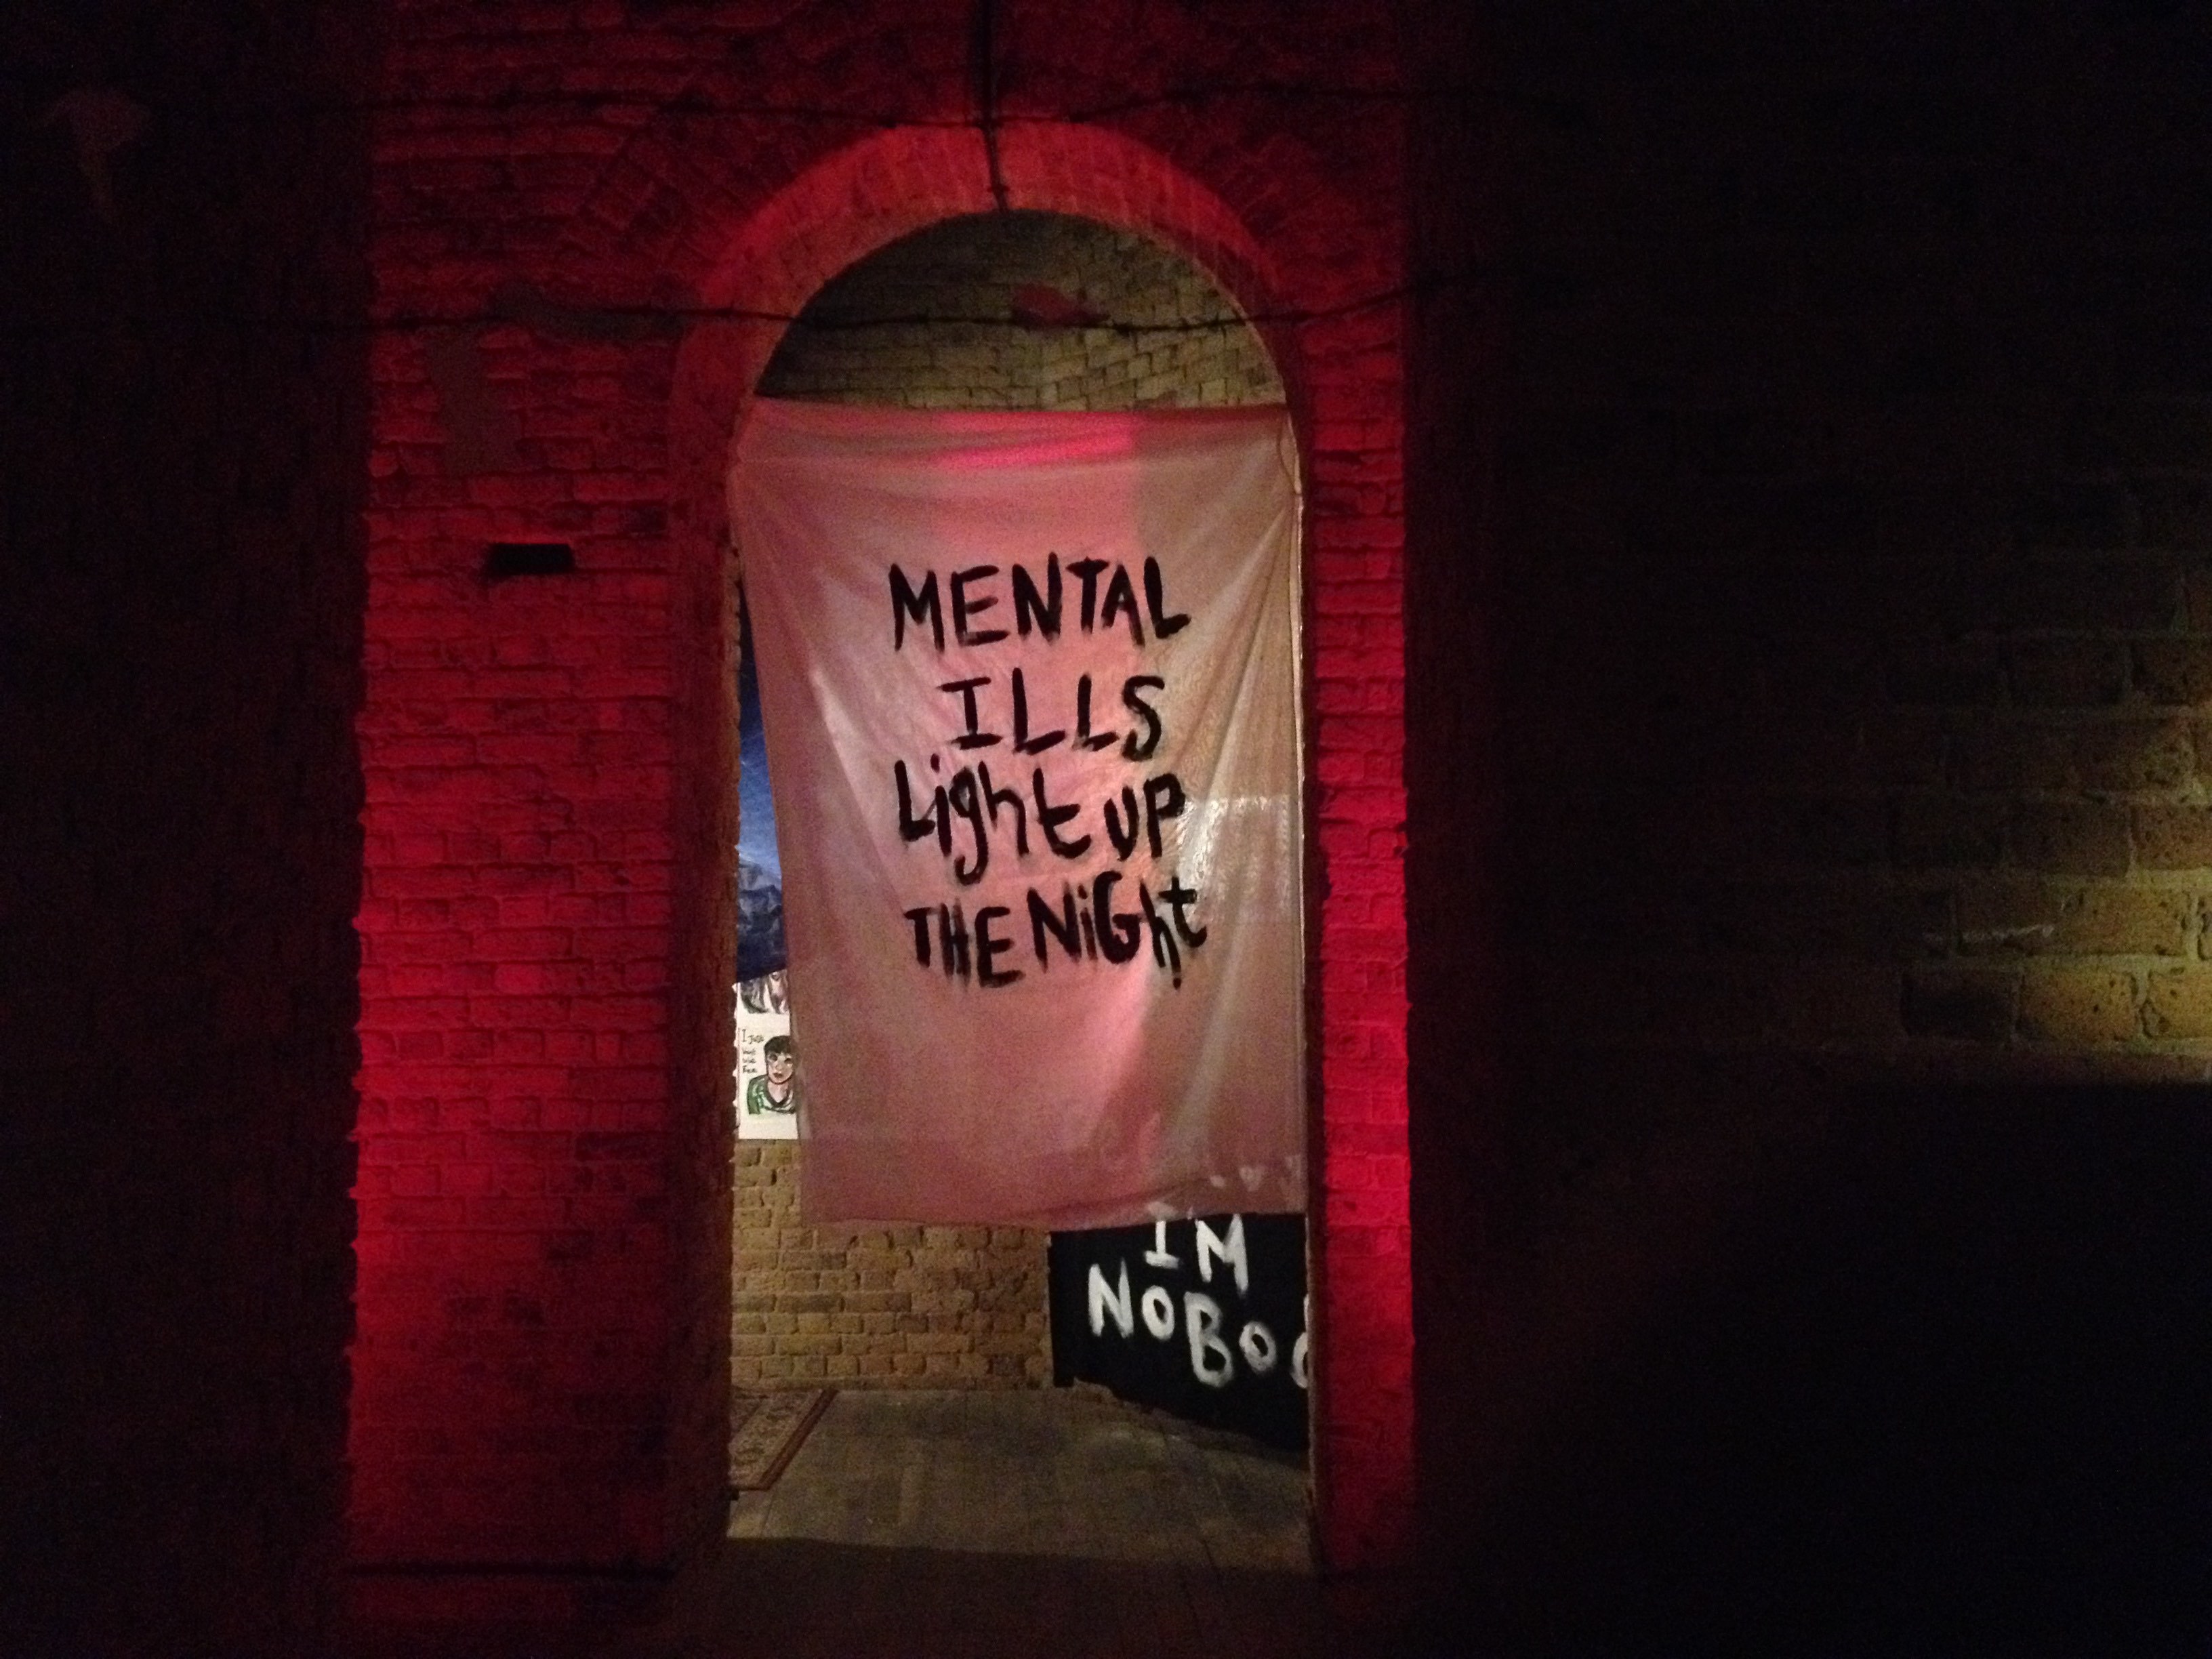 London Exhibition Night On My Mind Says End Custodial Sentences For Graffiti Writers I D